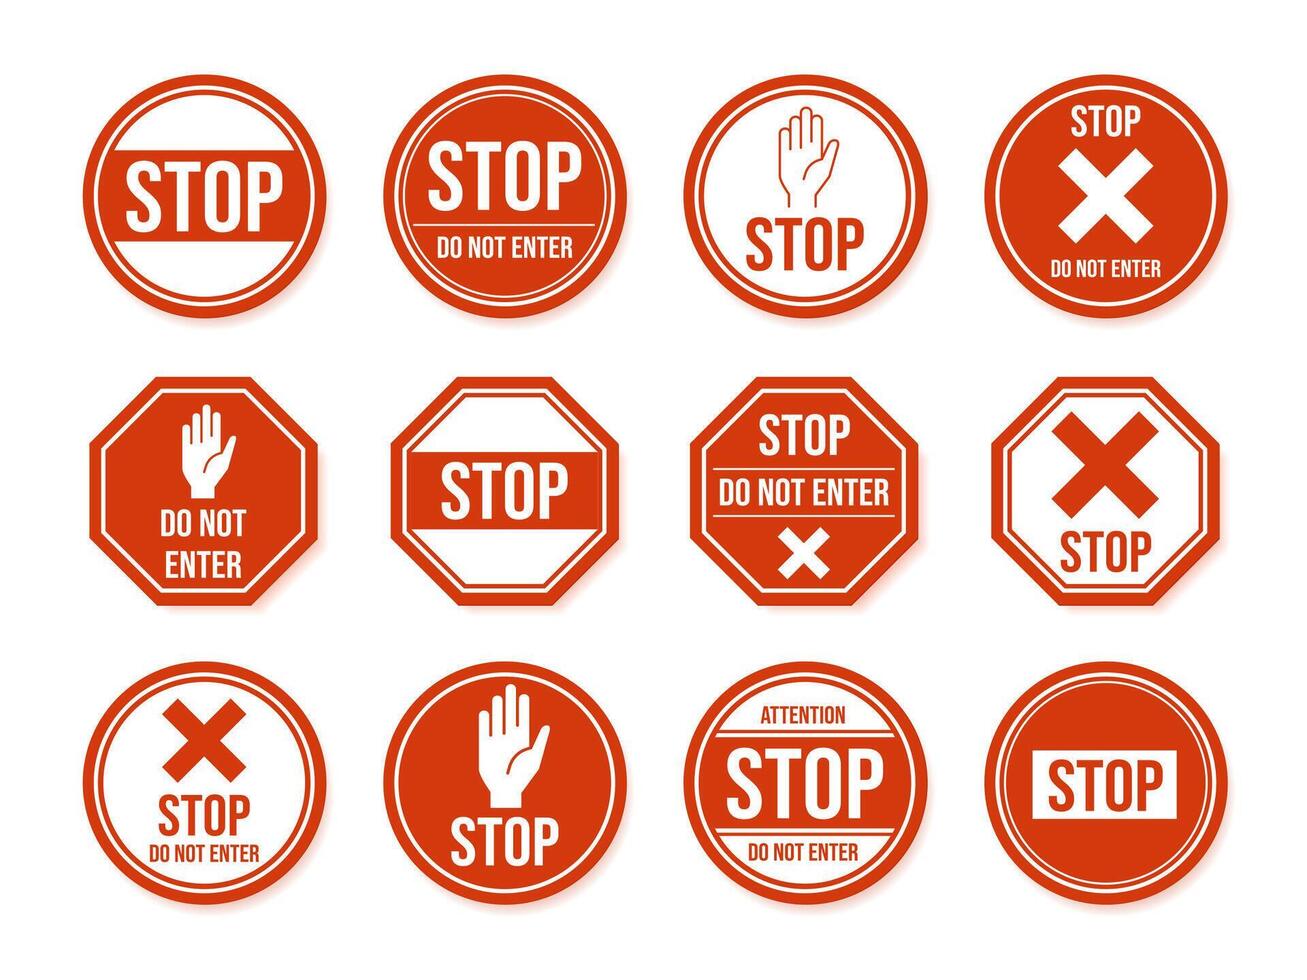 Stop road sign. Traffic road stop symbol, dangerous, restricted urban and highway symbols, warning direction signs vector isolated icon set